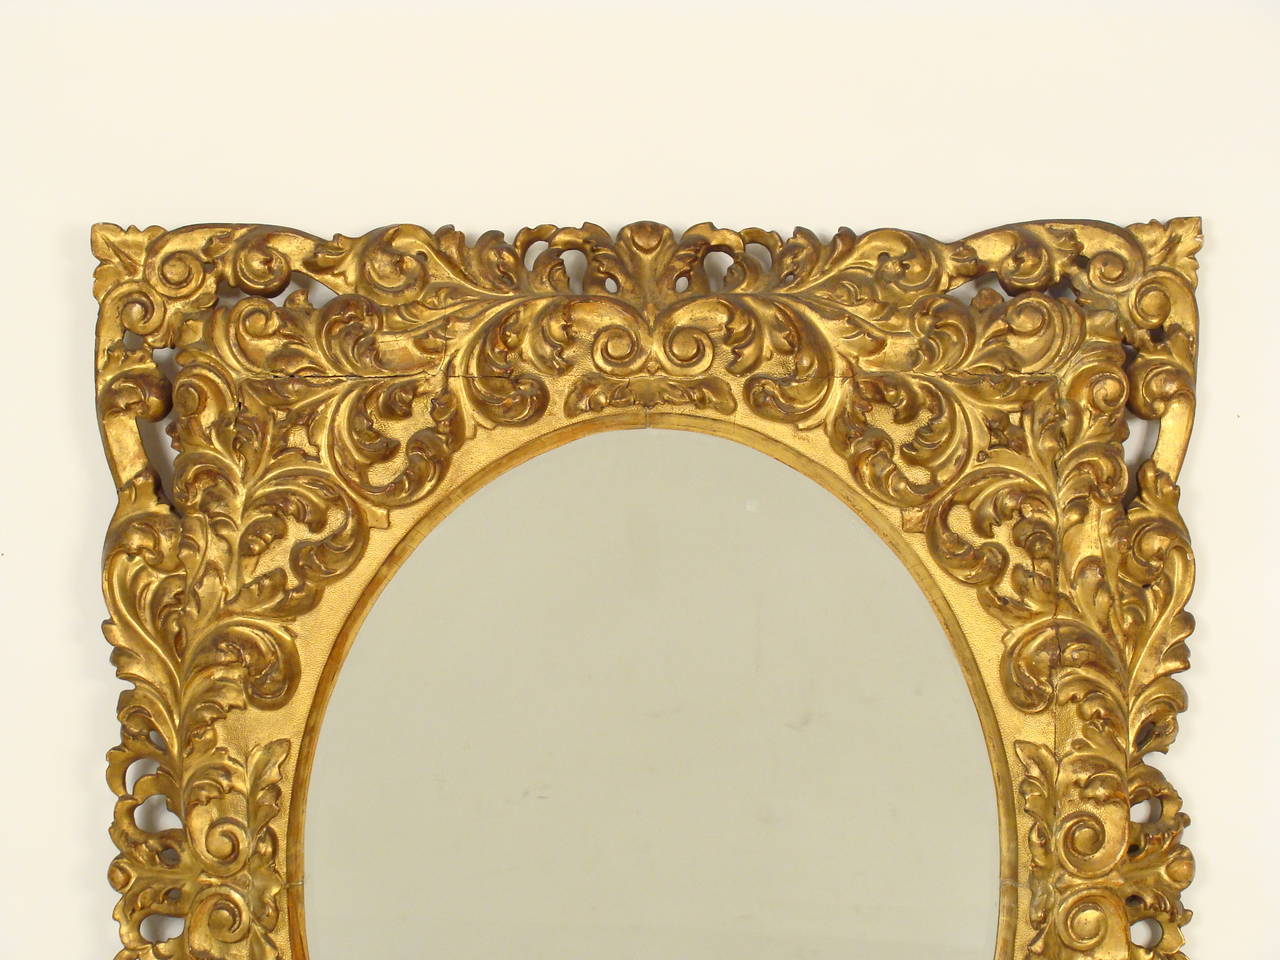 Italian Baroque style giltwood mirror, 19th century. This mirror retains its original old gold leaf finish.